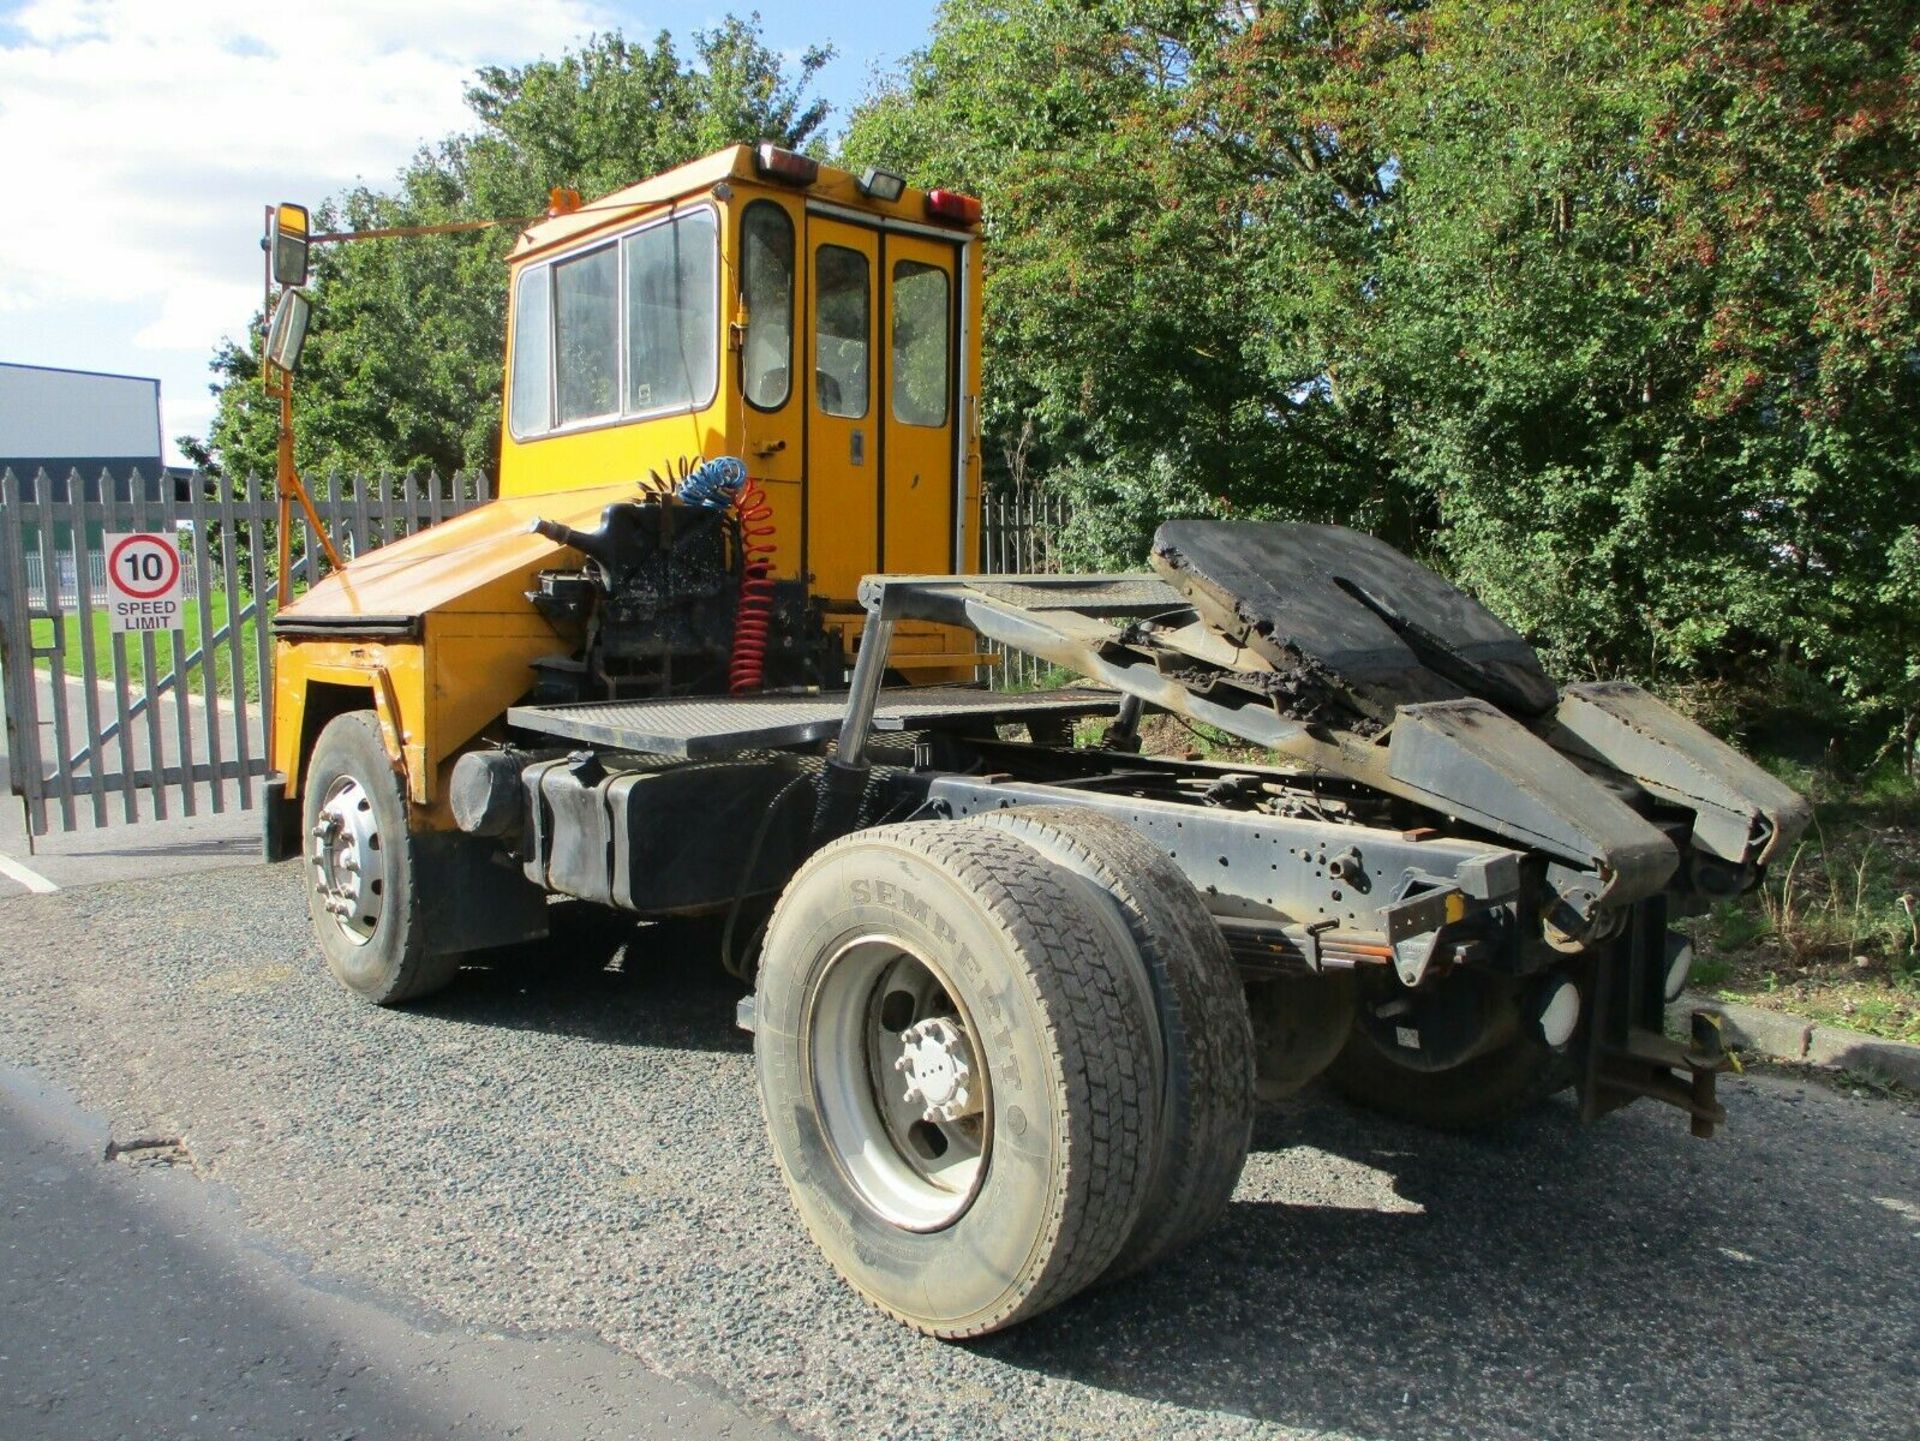 Reliance Dock spotter shunter tow tug tractor unit - Image 7 of 11